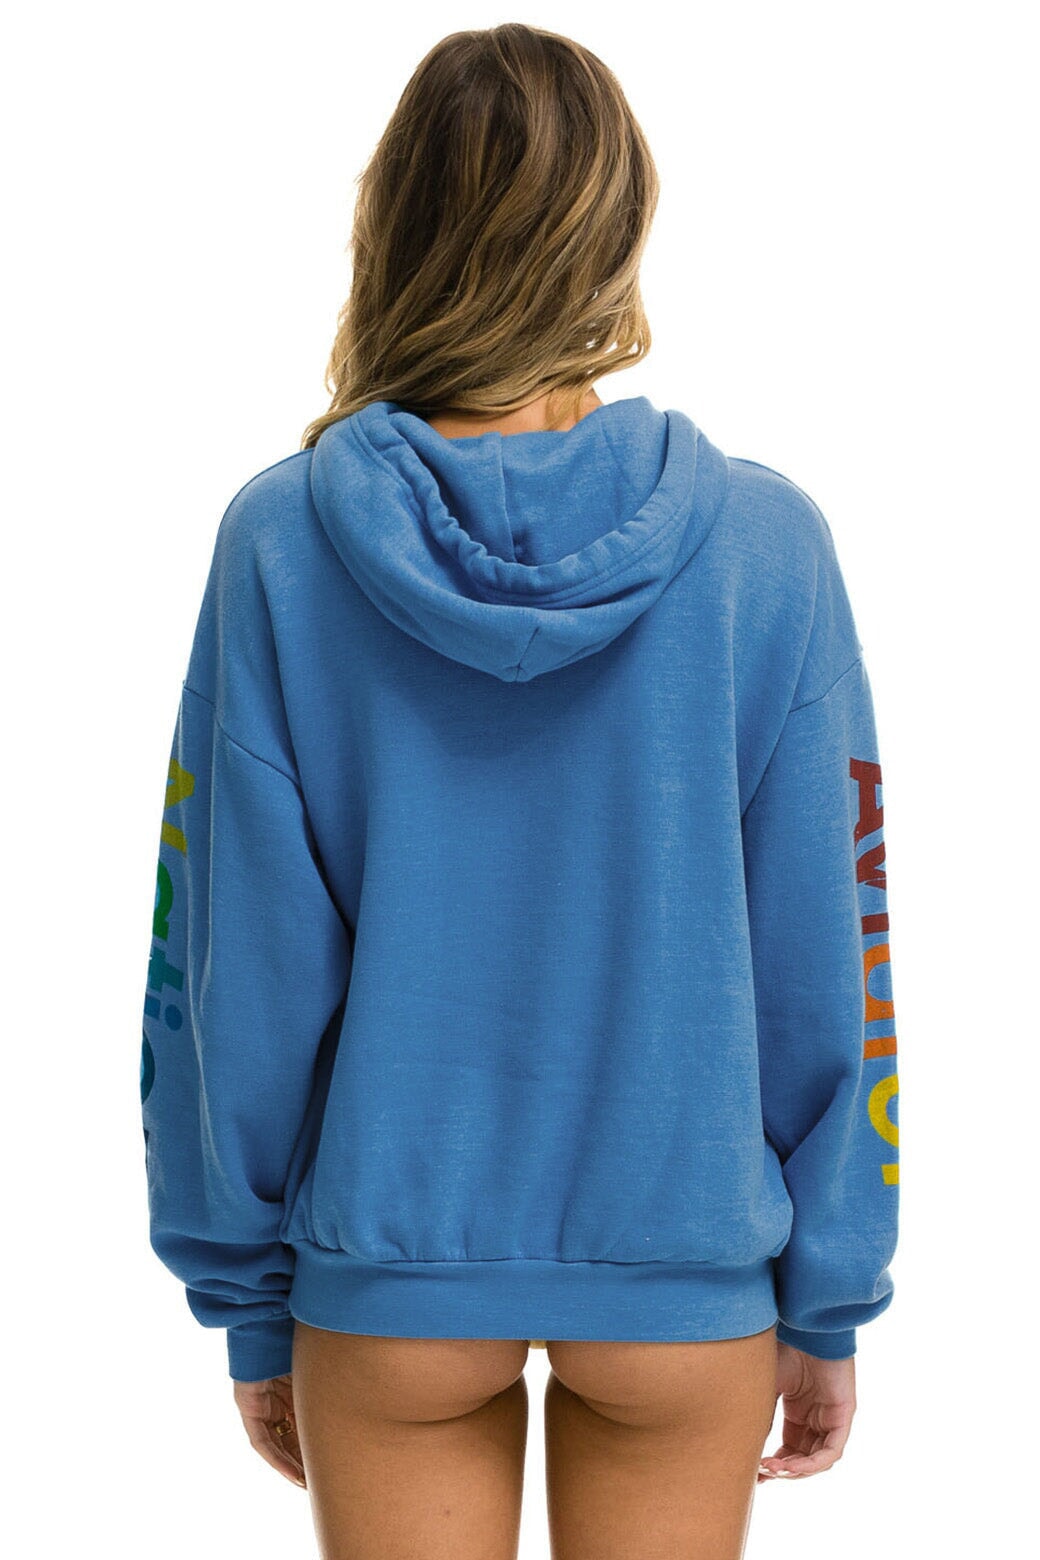 AVIATOR NATION MIAMI RELAXED PULLOVER HOODIE - COBALT Hoodie Aviator Nation 